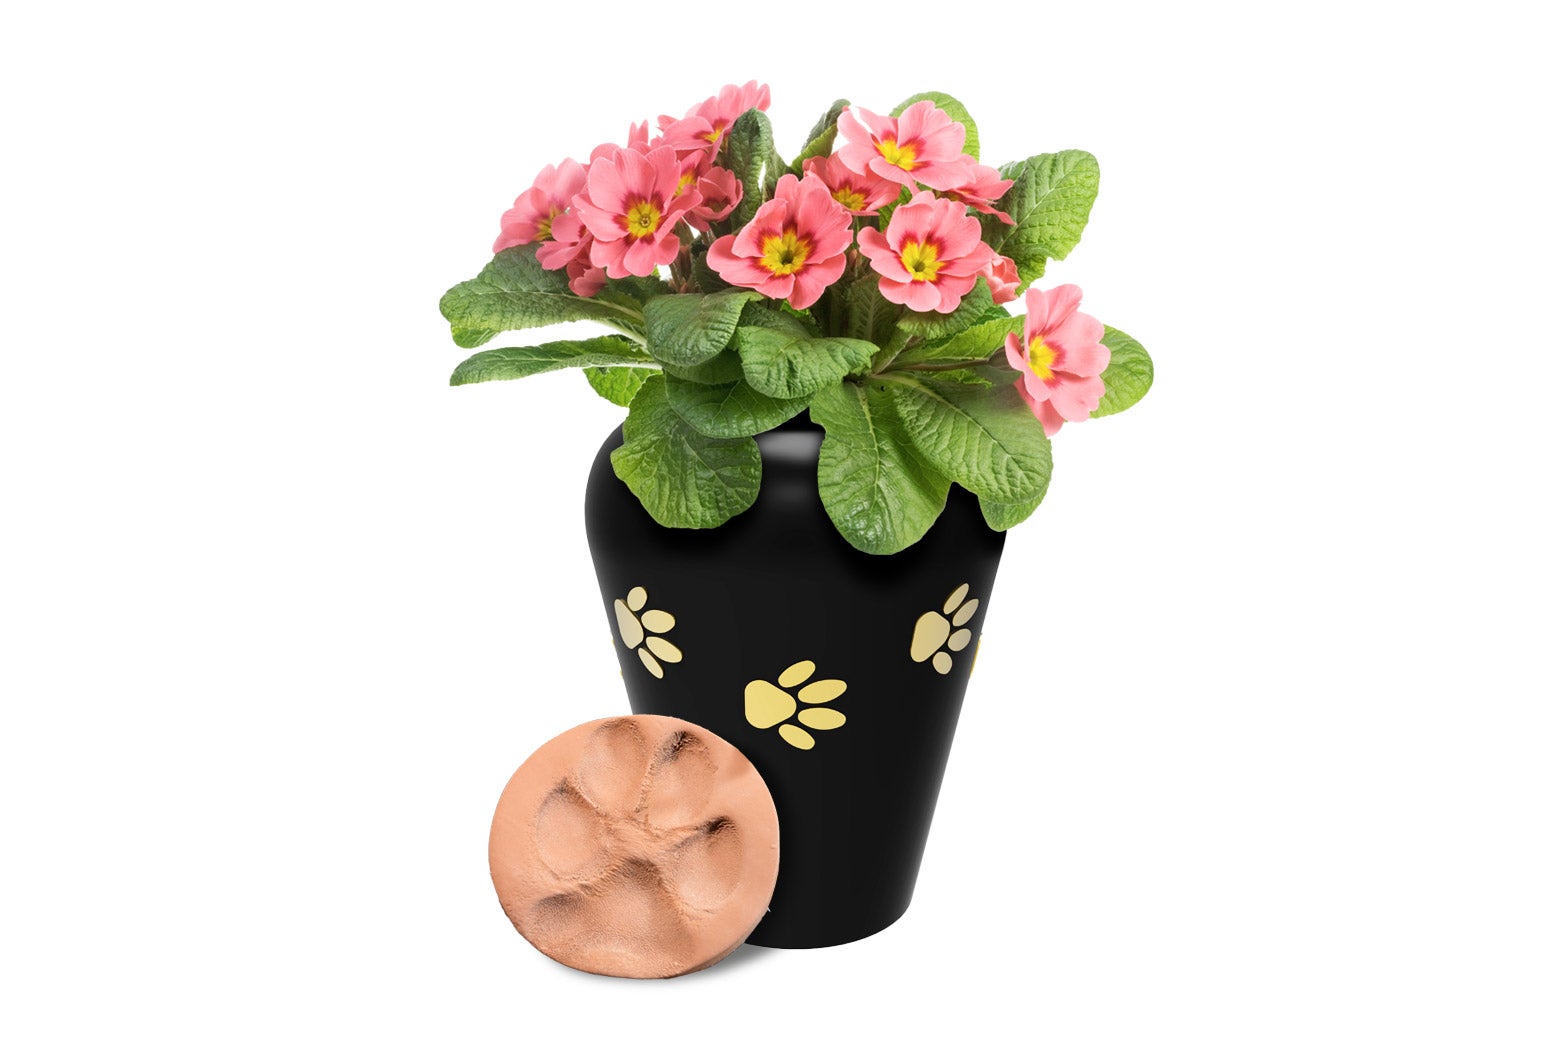 A black urn with small paw prints decorating it, with a plant with pink flowers growing out of the top.